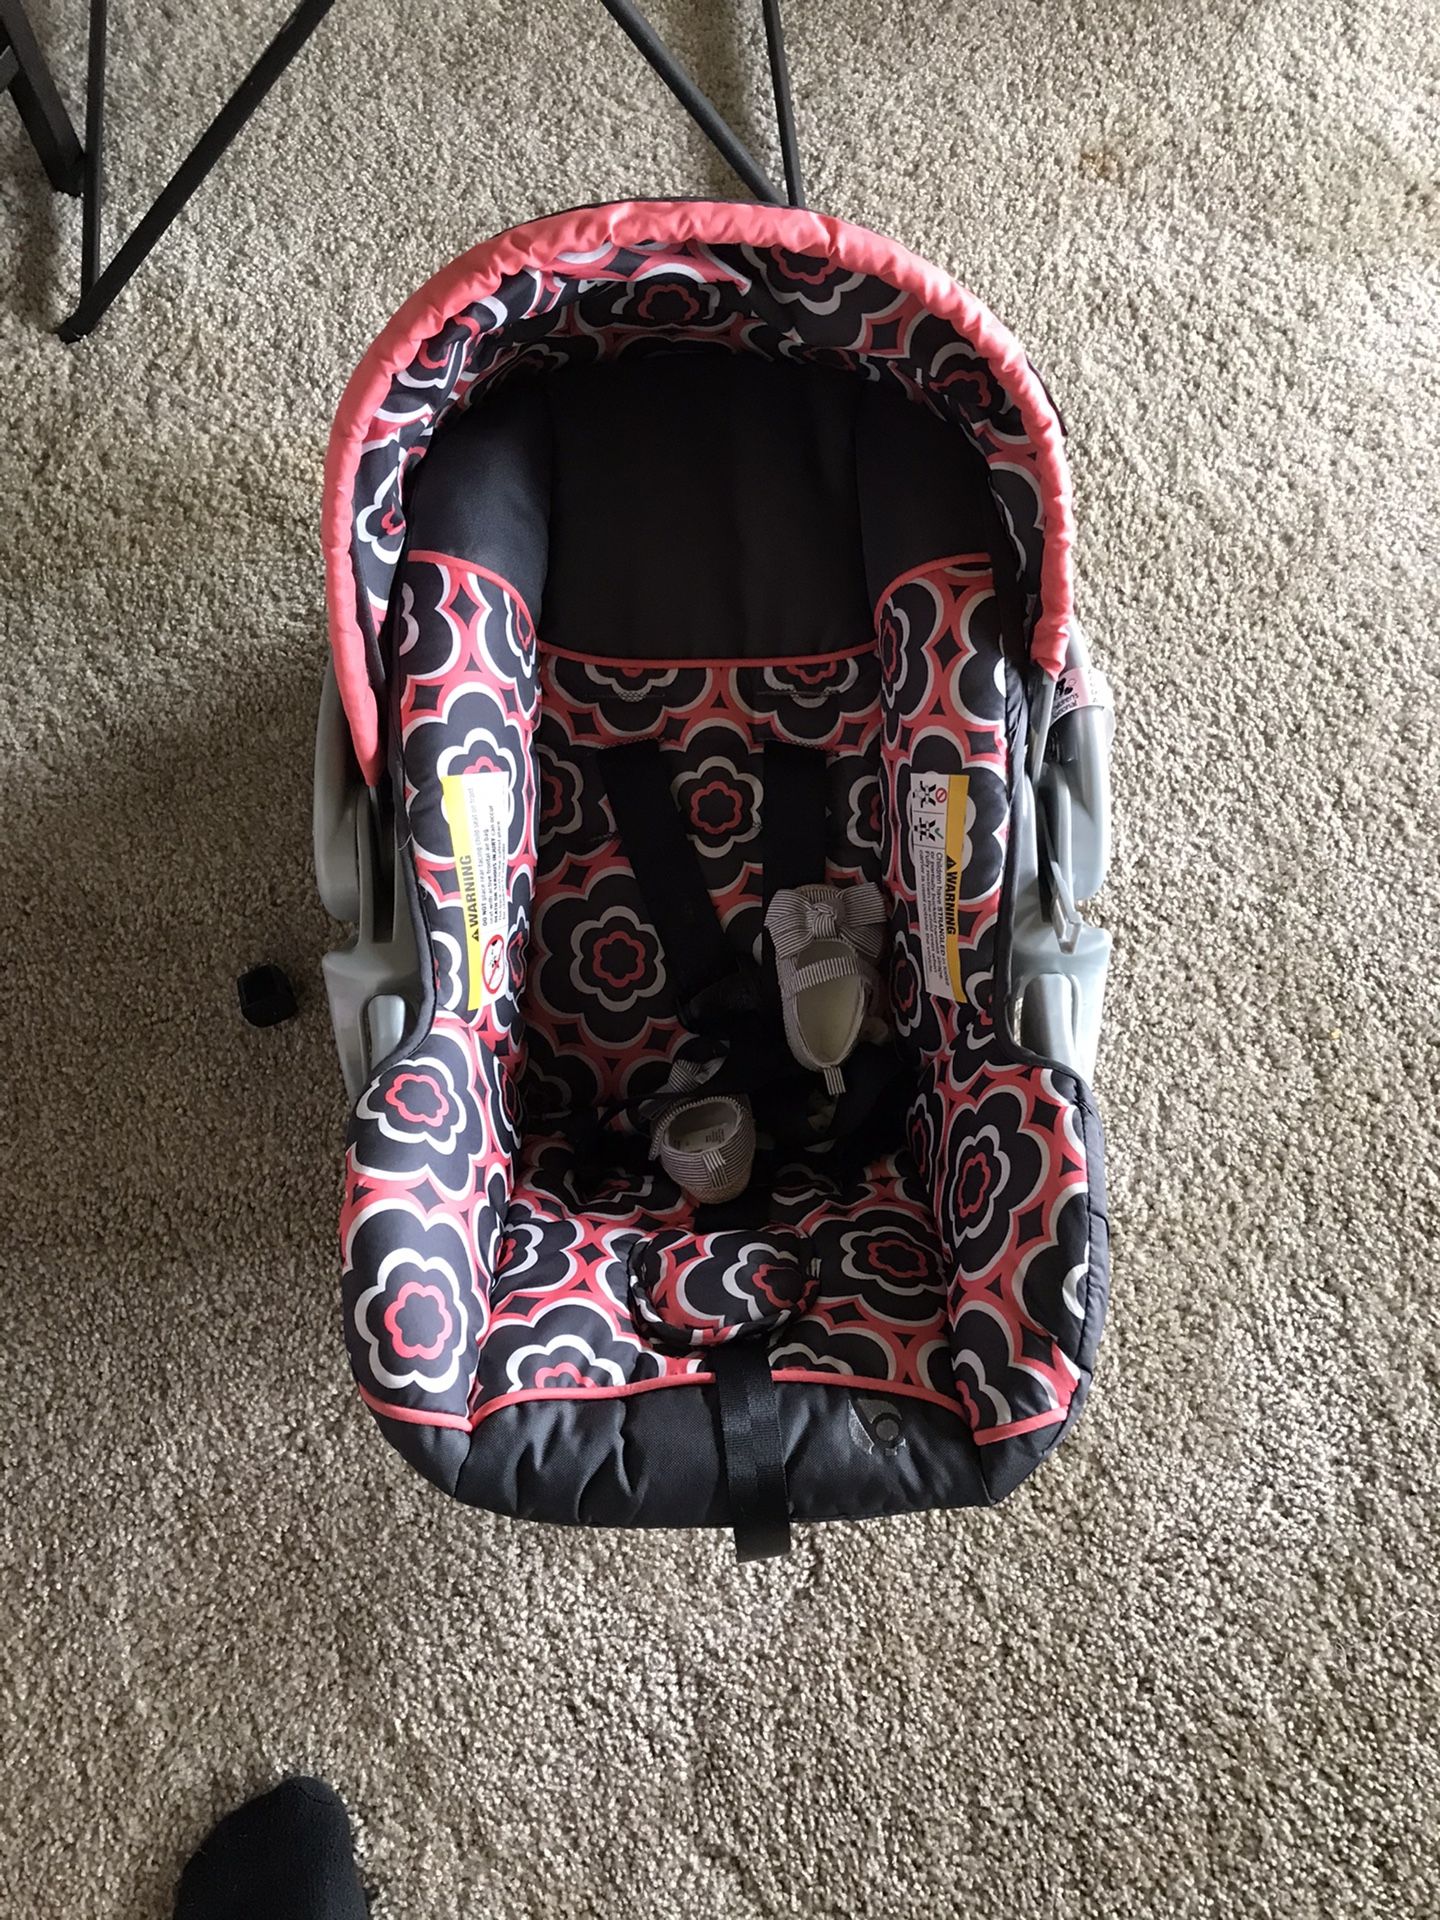 Car seat for baby, not the shoes :)